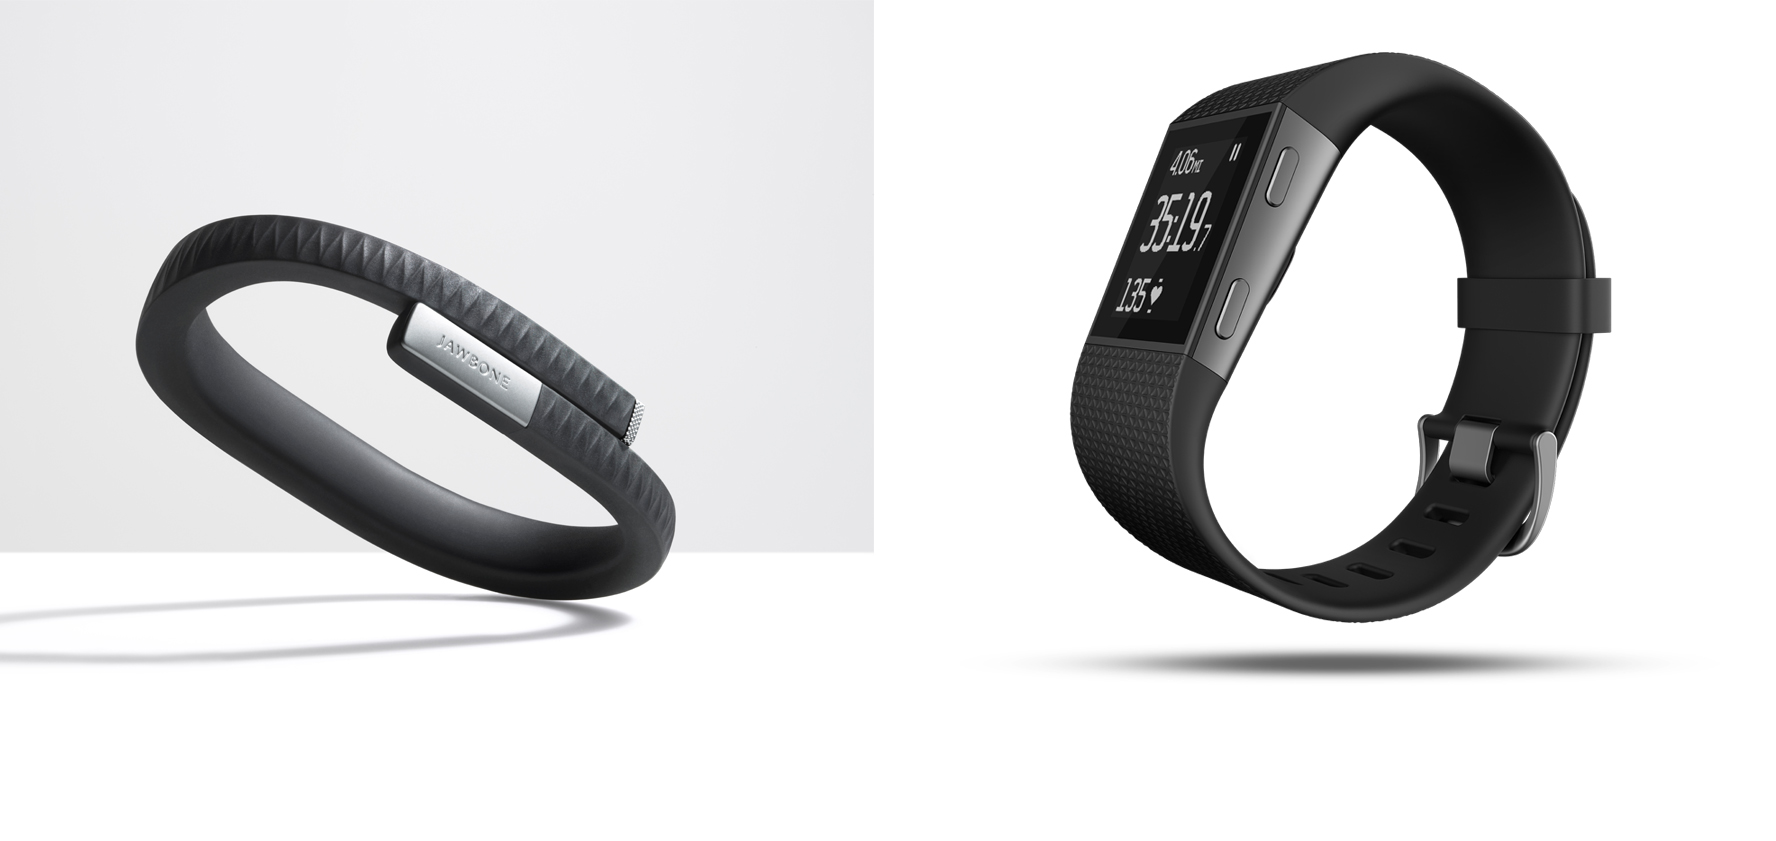 The Jawbone Up and the Fitbit Surge